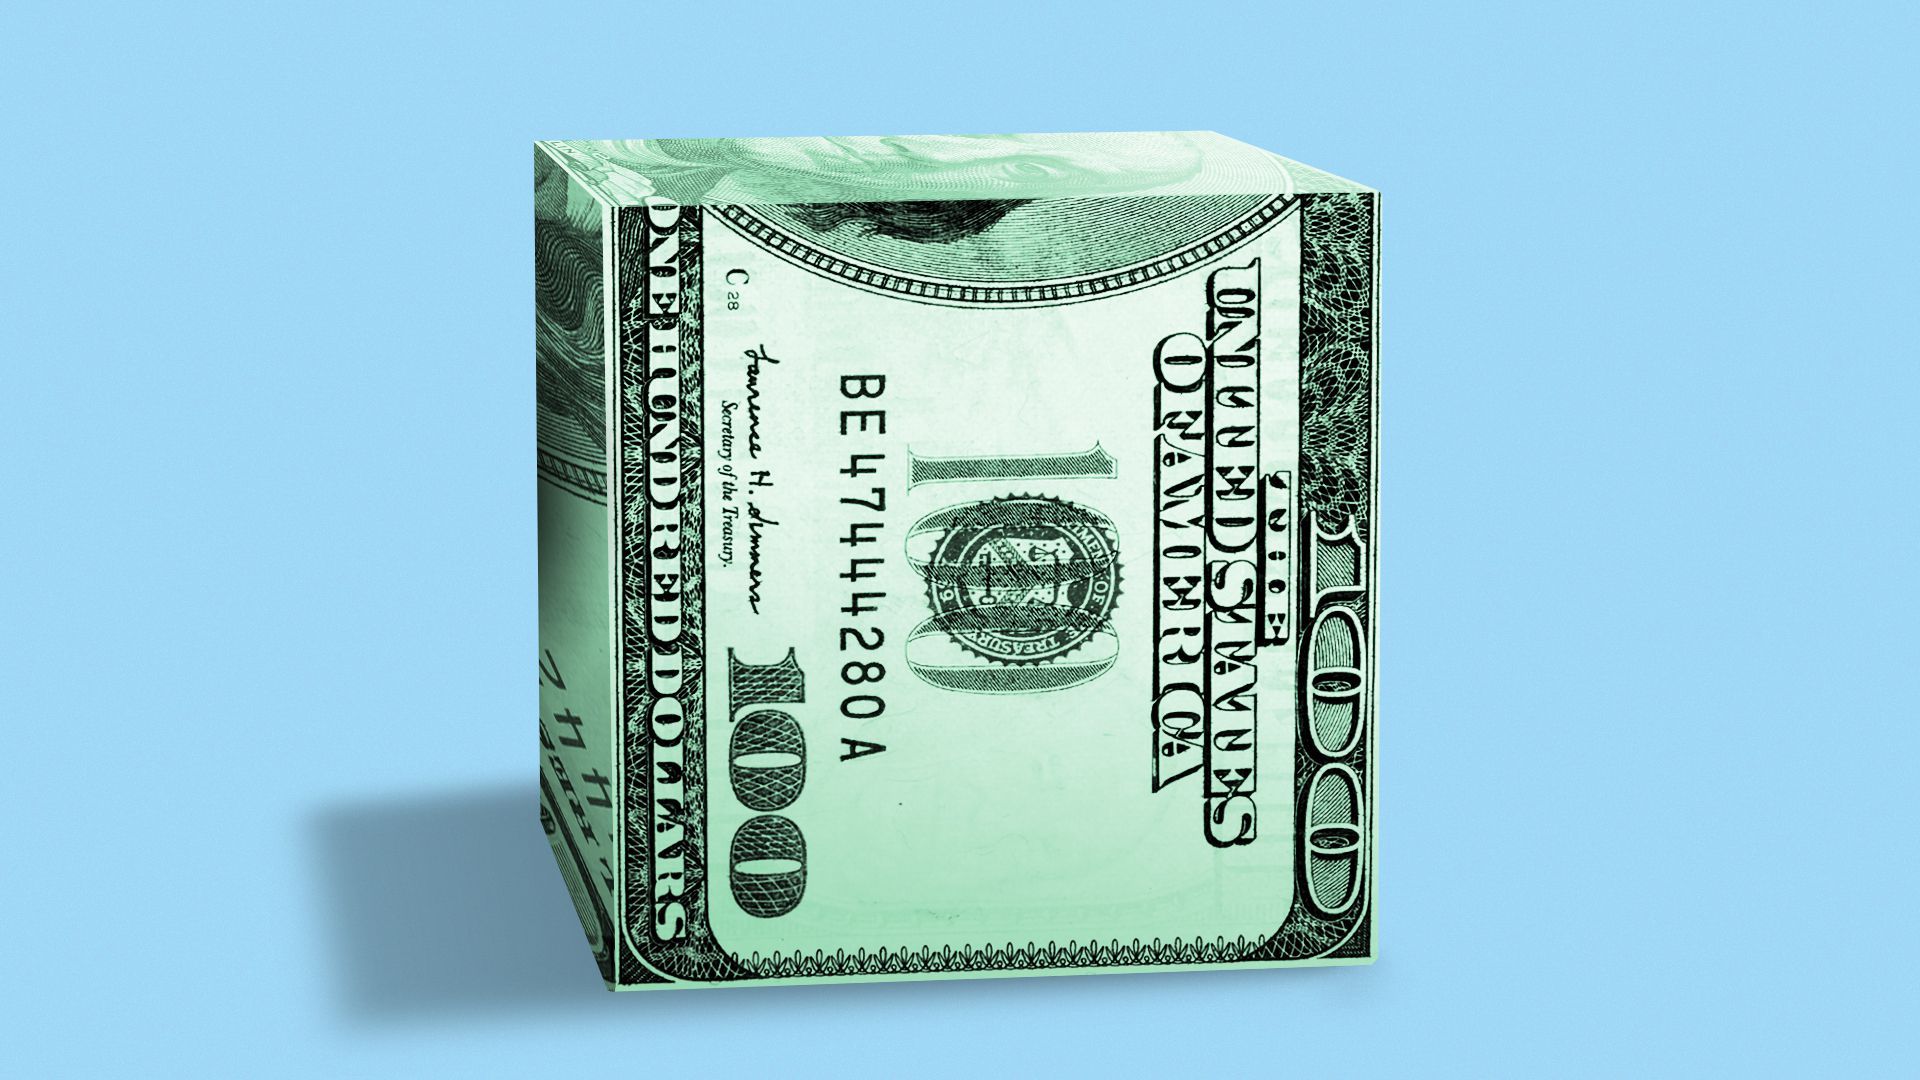 Illustration of a closed box made from a one hundred dollar bill